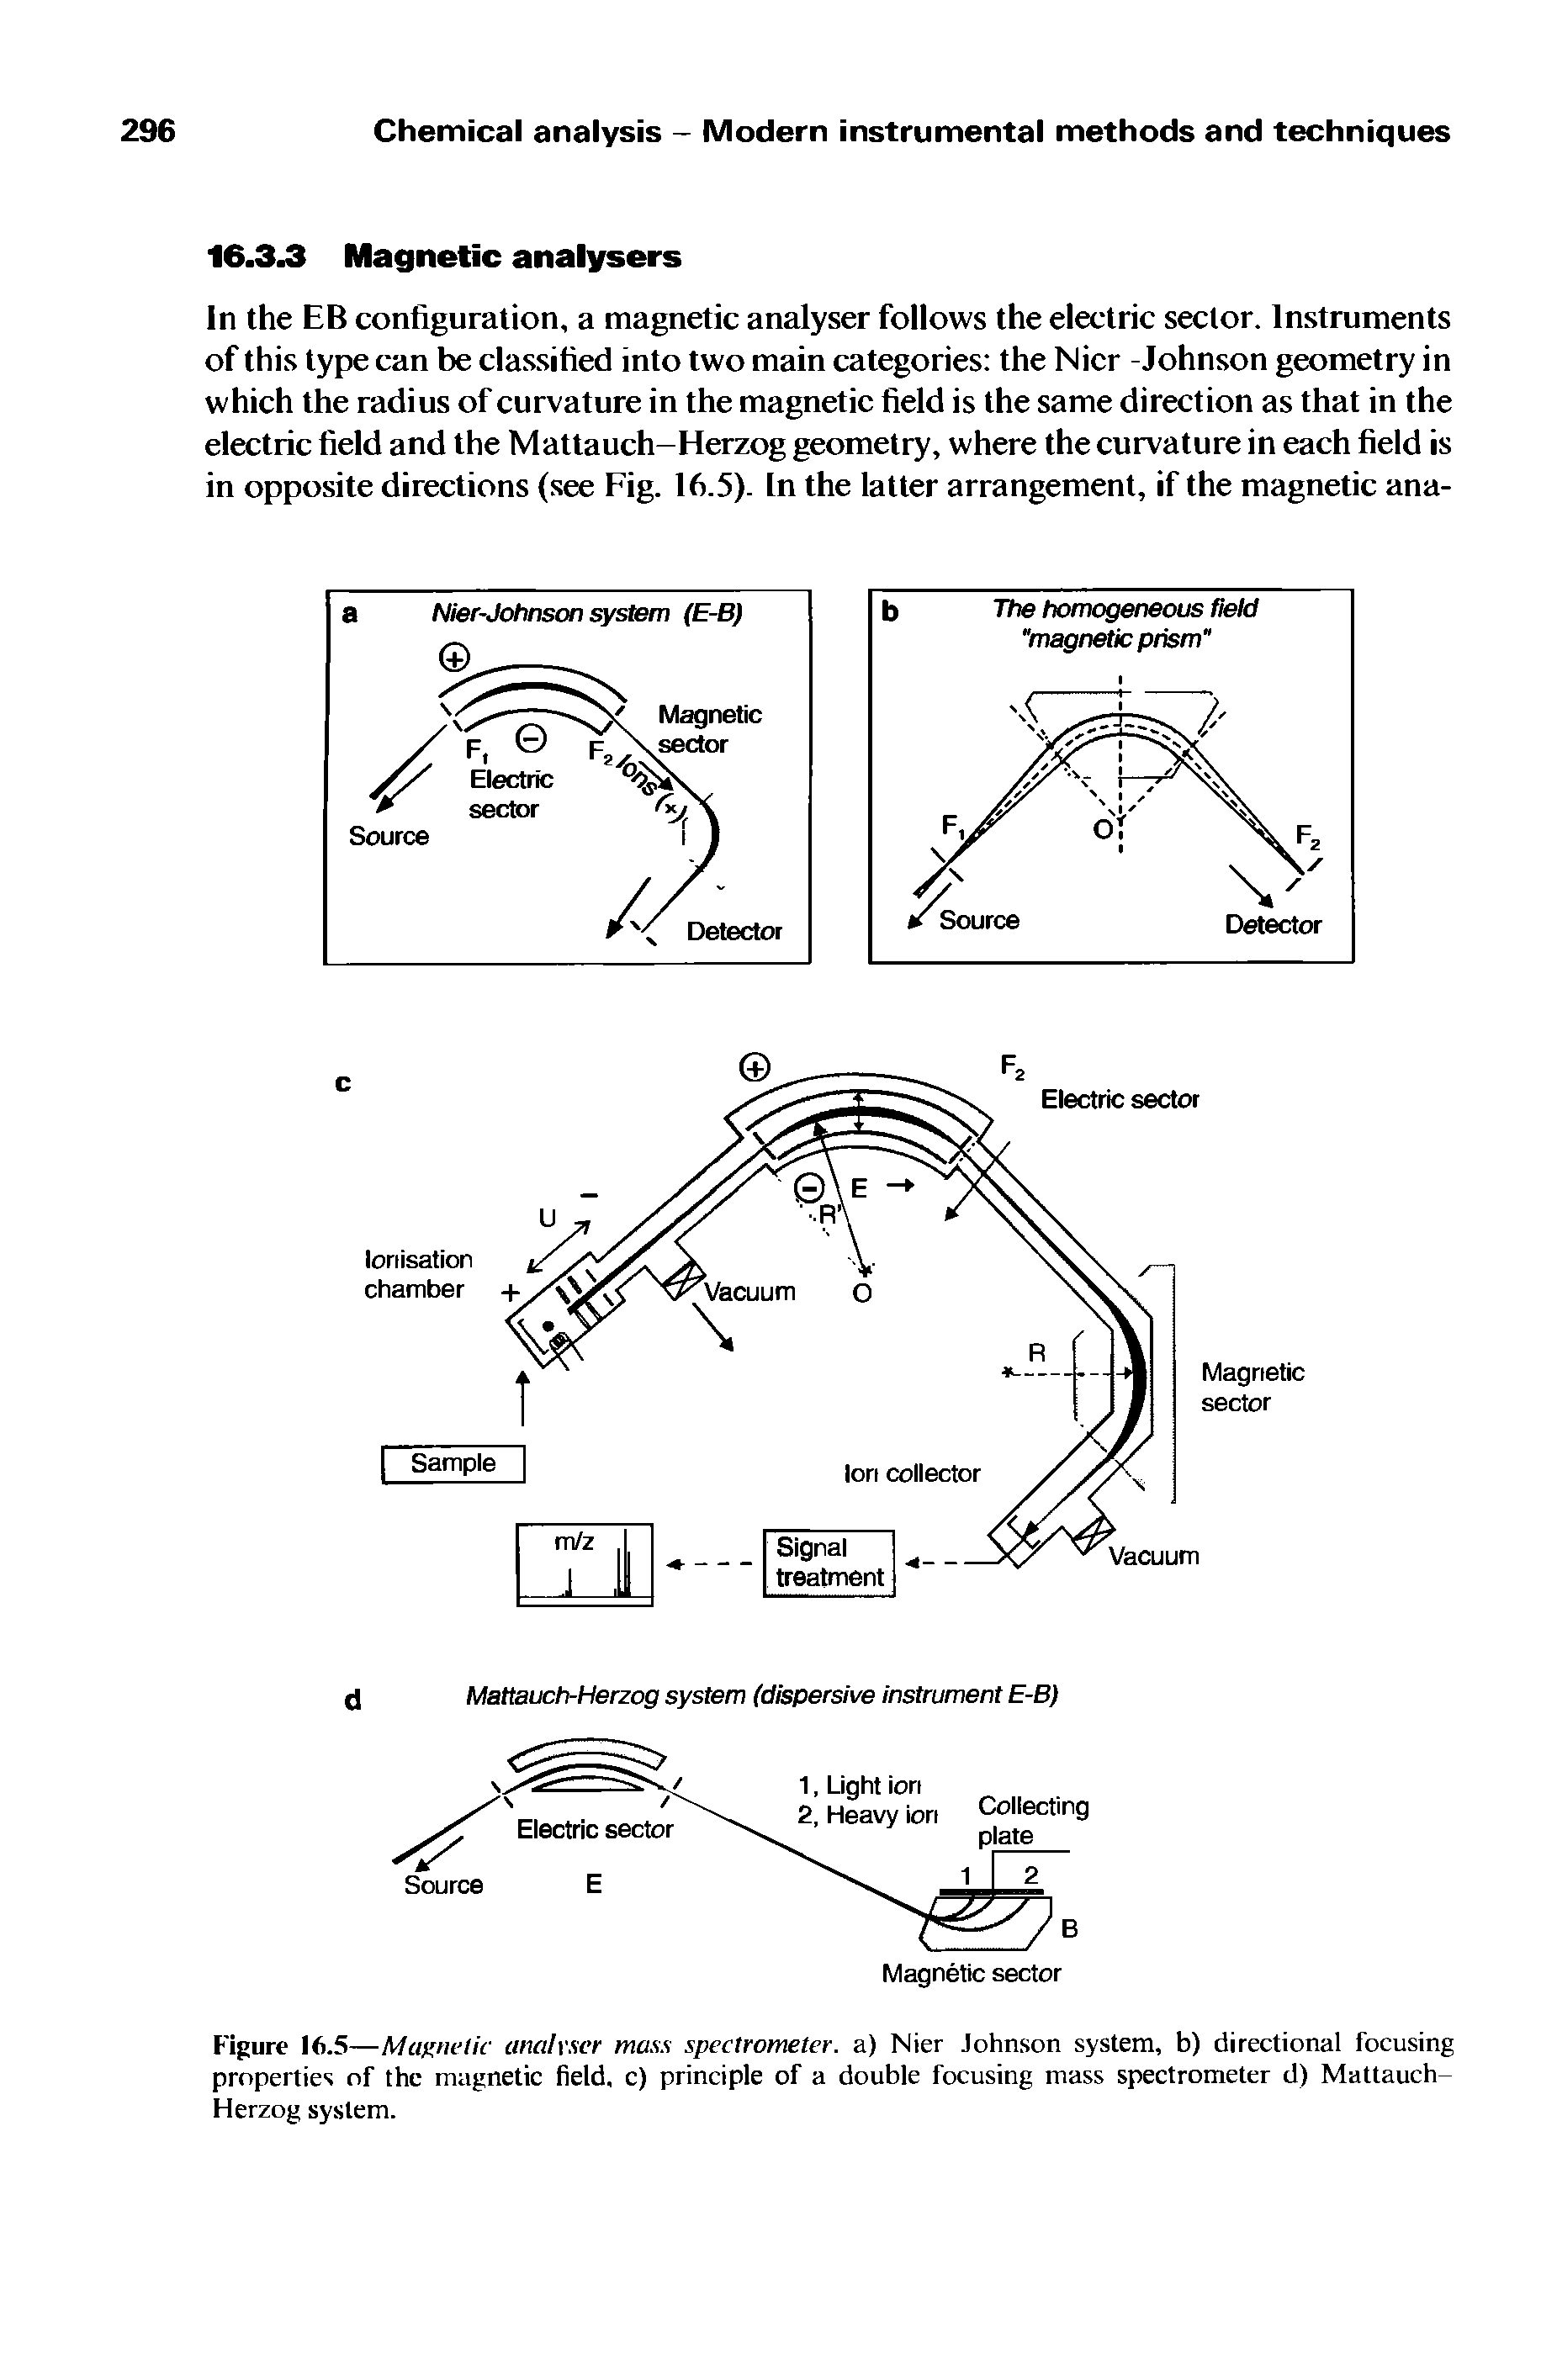 Figure 16.5—Magnetic analyser mass spectrometer, a) Nier Johnson system, b) directional focusing properties of the magnetic field, c) principle of a double focusing mass spectrometer d) Mattauch-Herzog system.